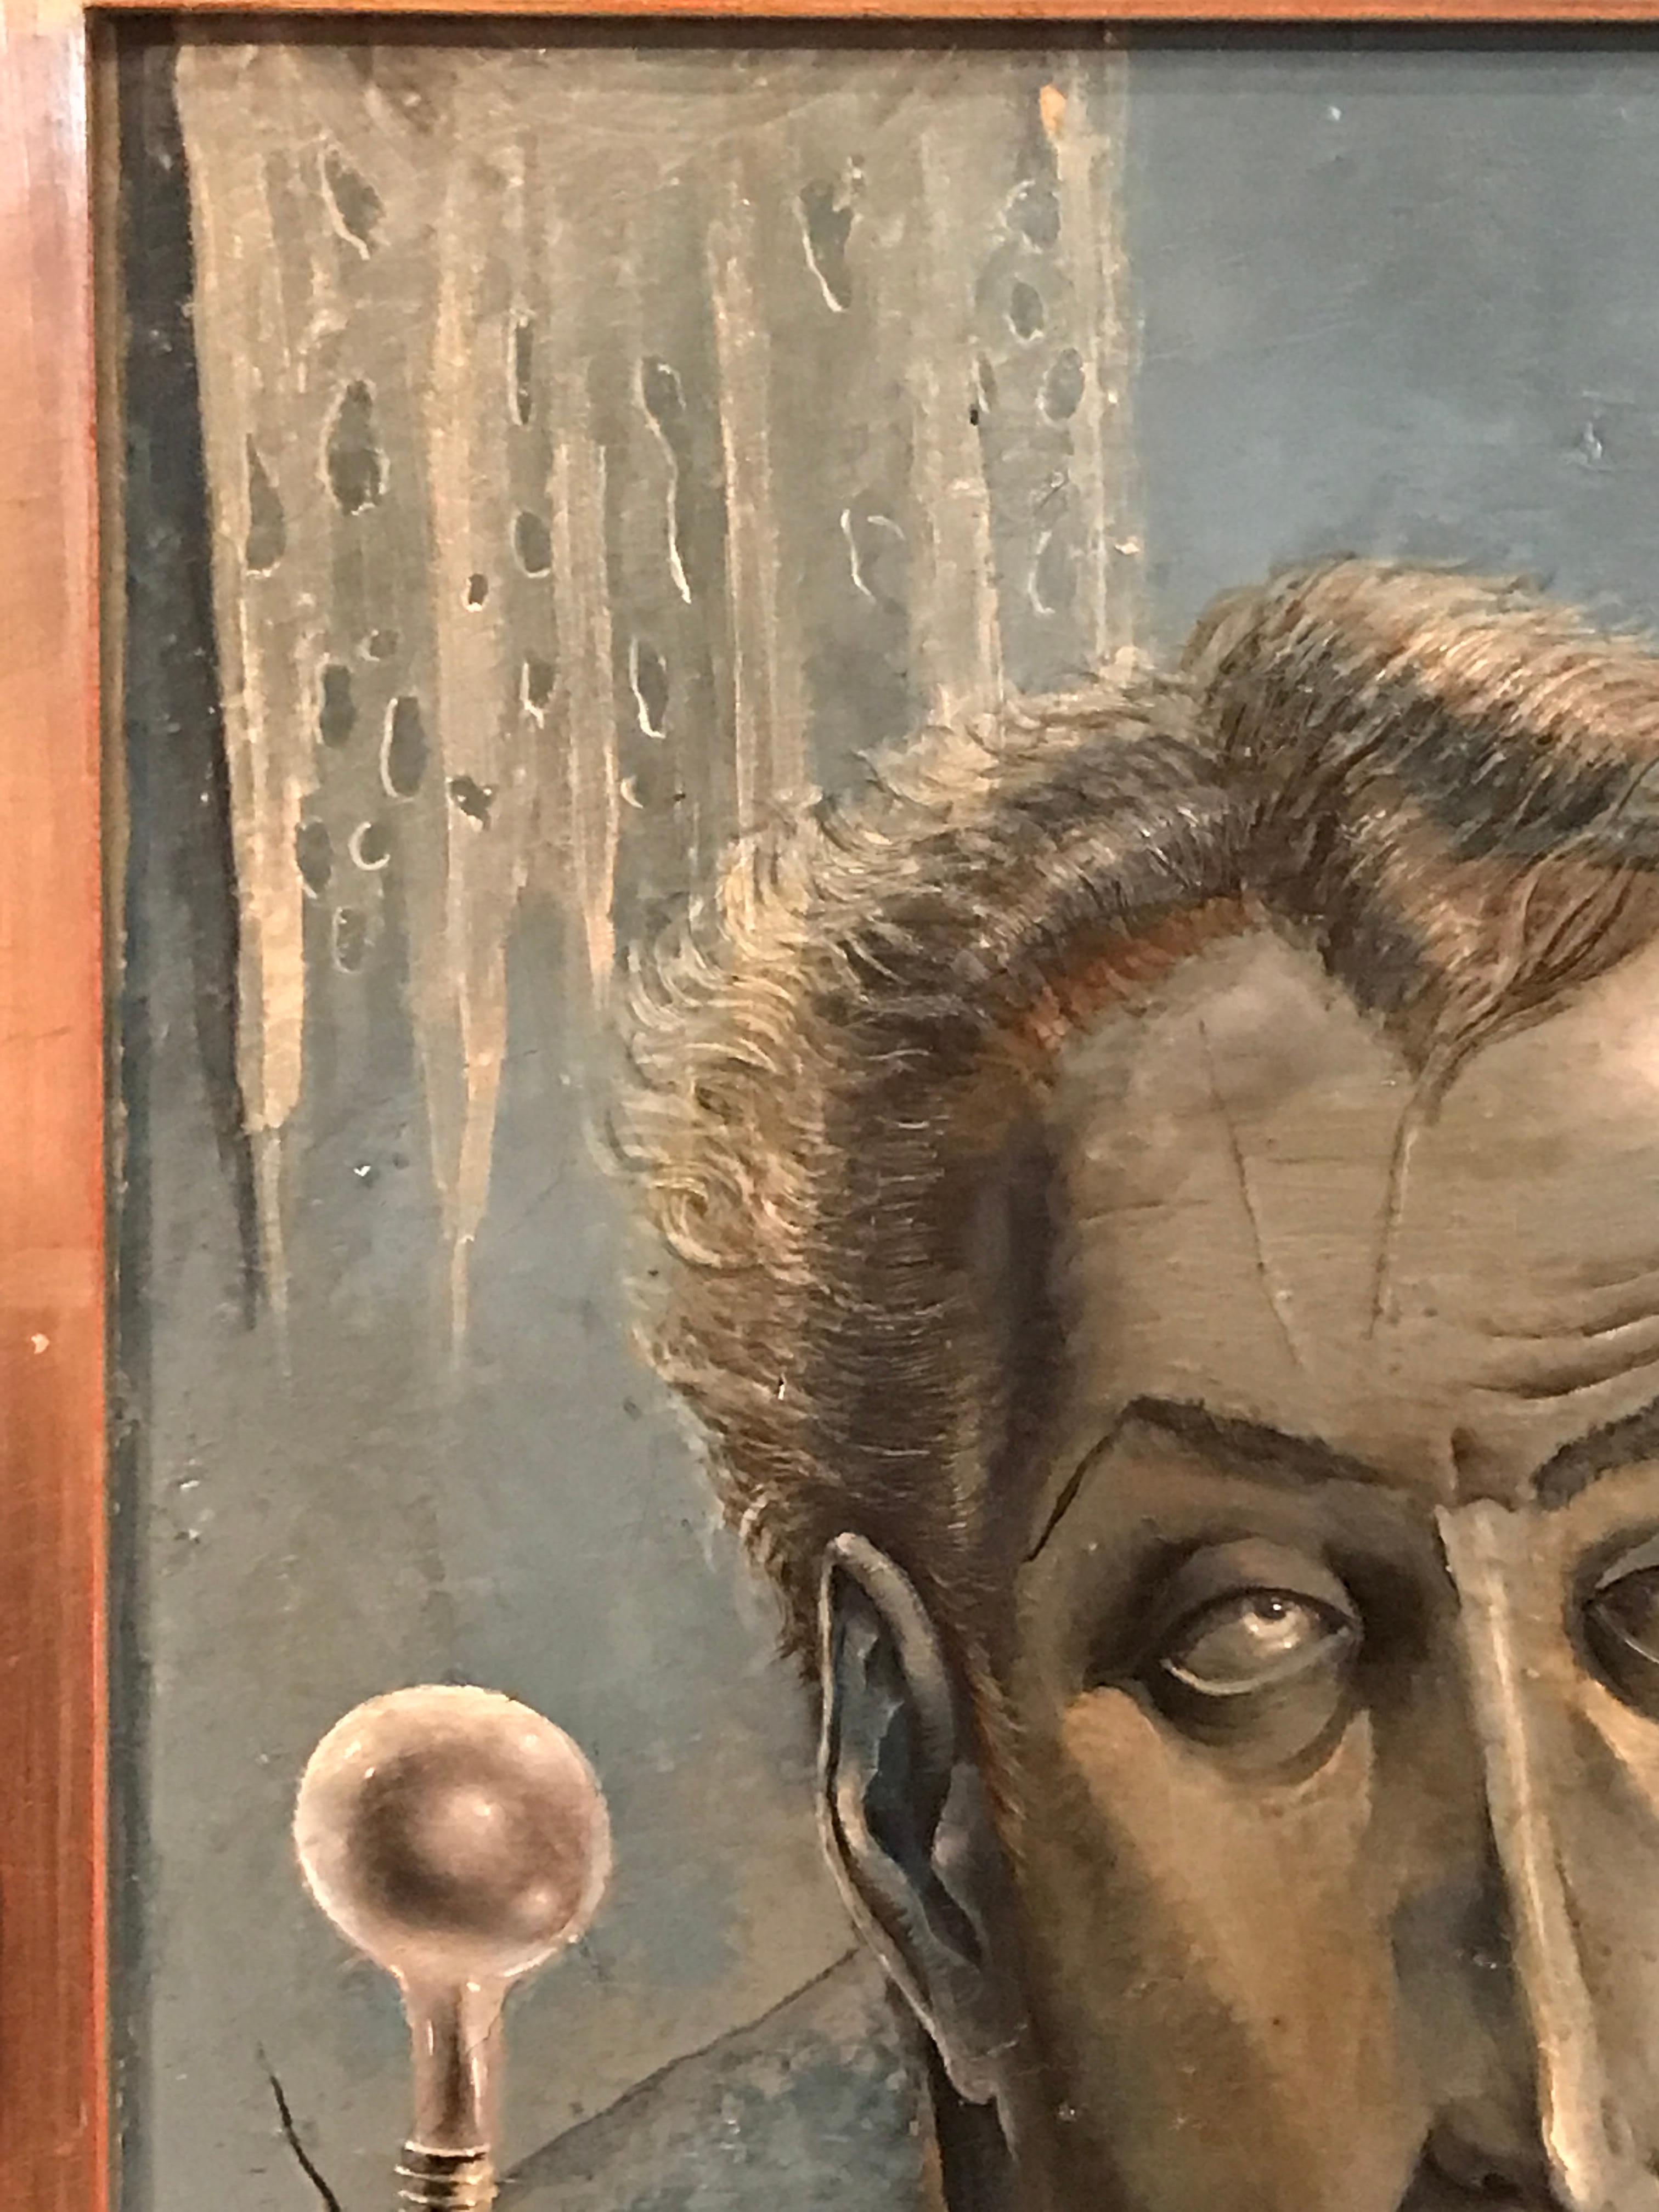  This painting is a portrait of Vincent Price, the late great American actor (1911-1993) is an example of artist's early surrealist works. Price was a mentor of the artist.

Howard Warshaw American 1920-1977 was a painter, teacher and muralist.  He 